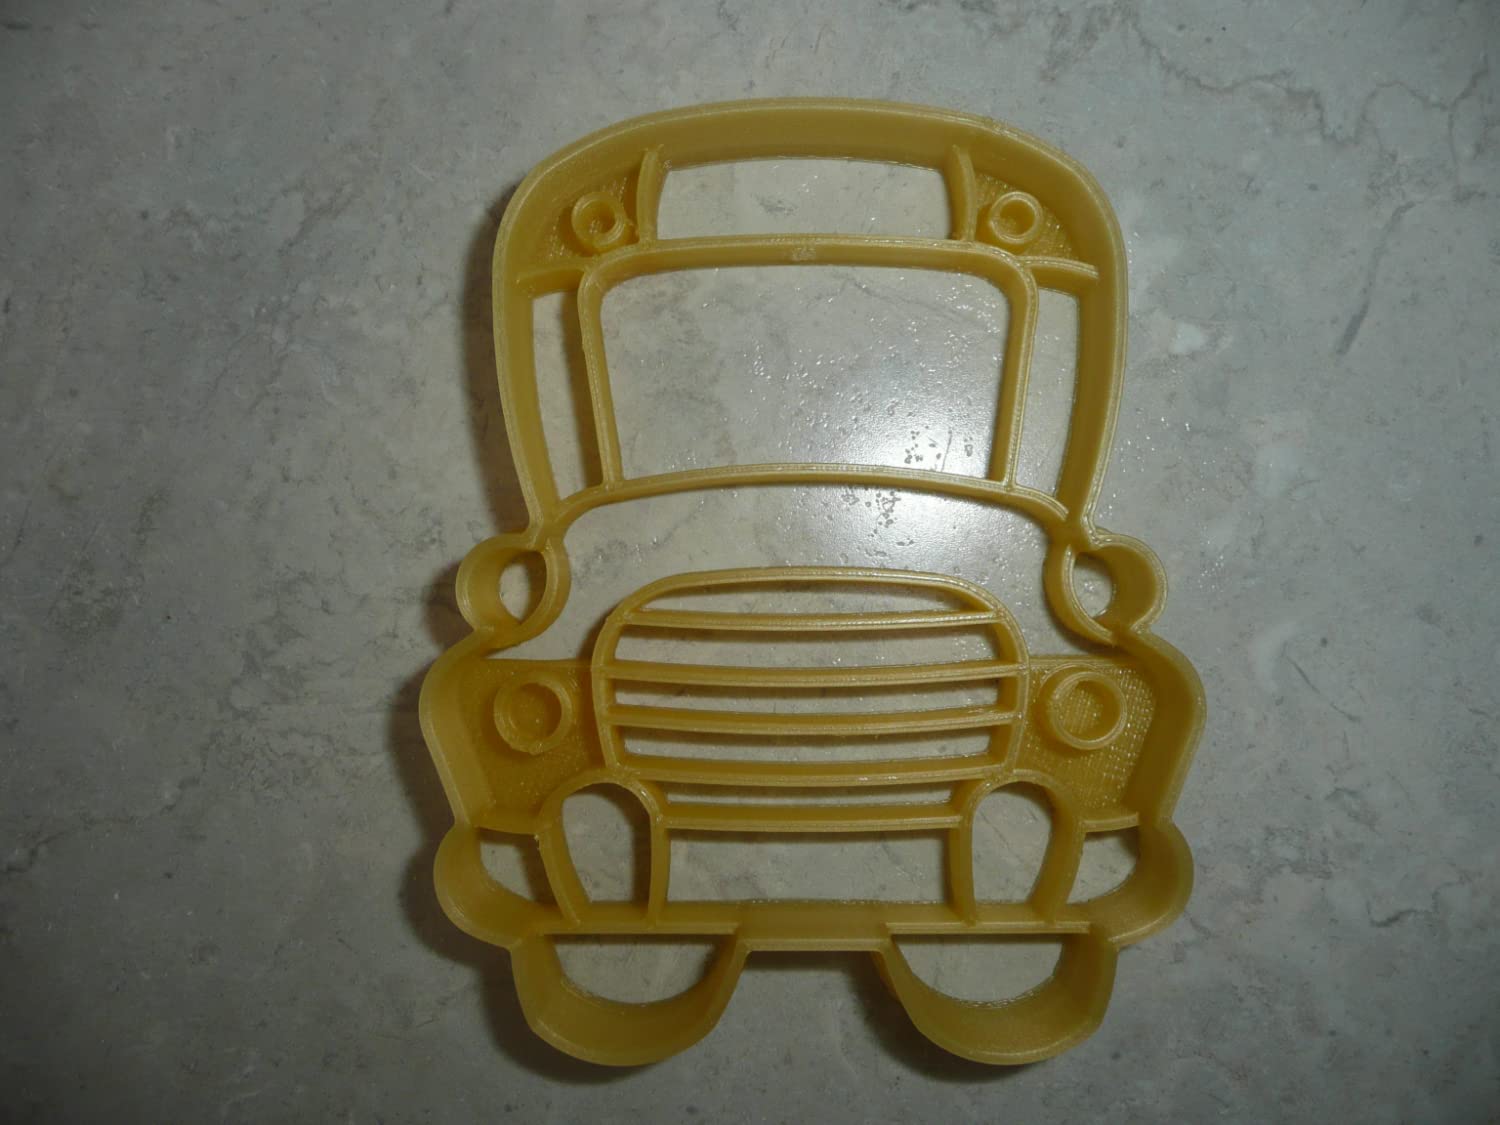 SCHOOL BUS FRONT VIEW CARTOON STYLE DETAILED COOKIE CUTTER MADE IN USA PR4959